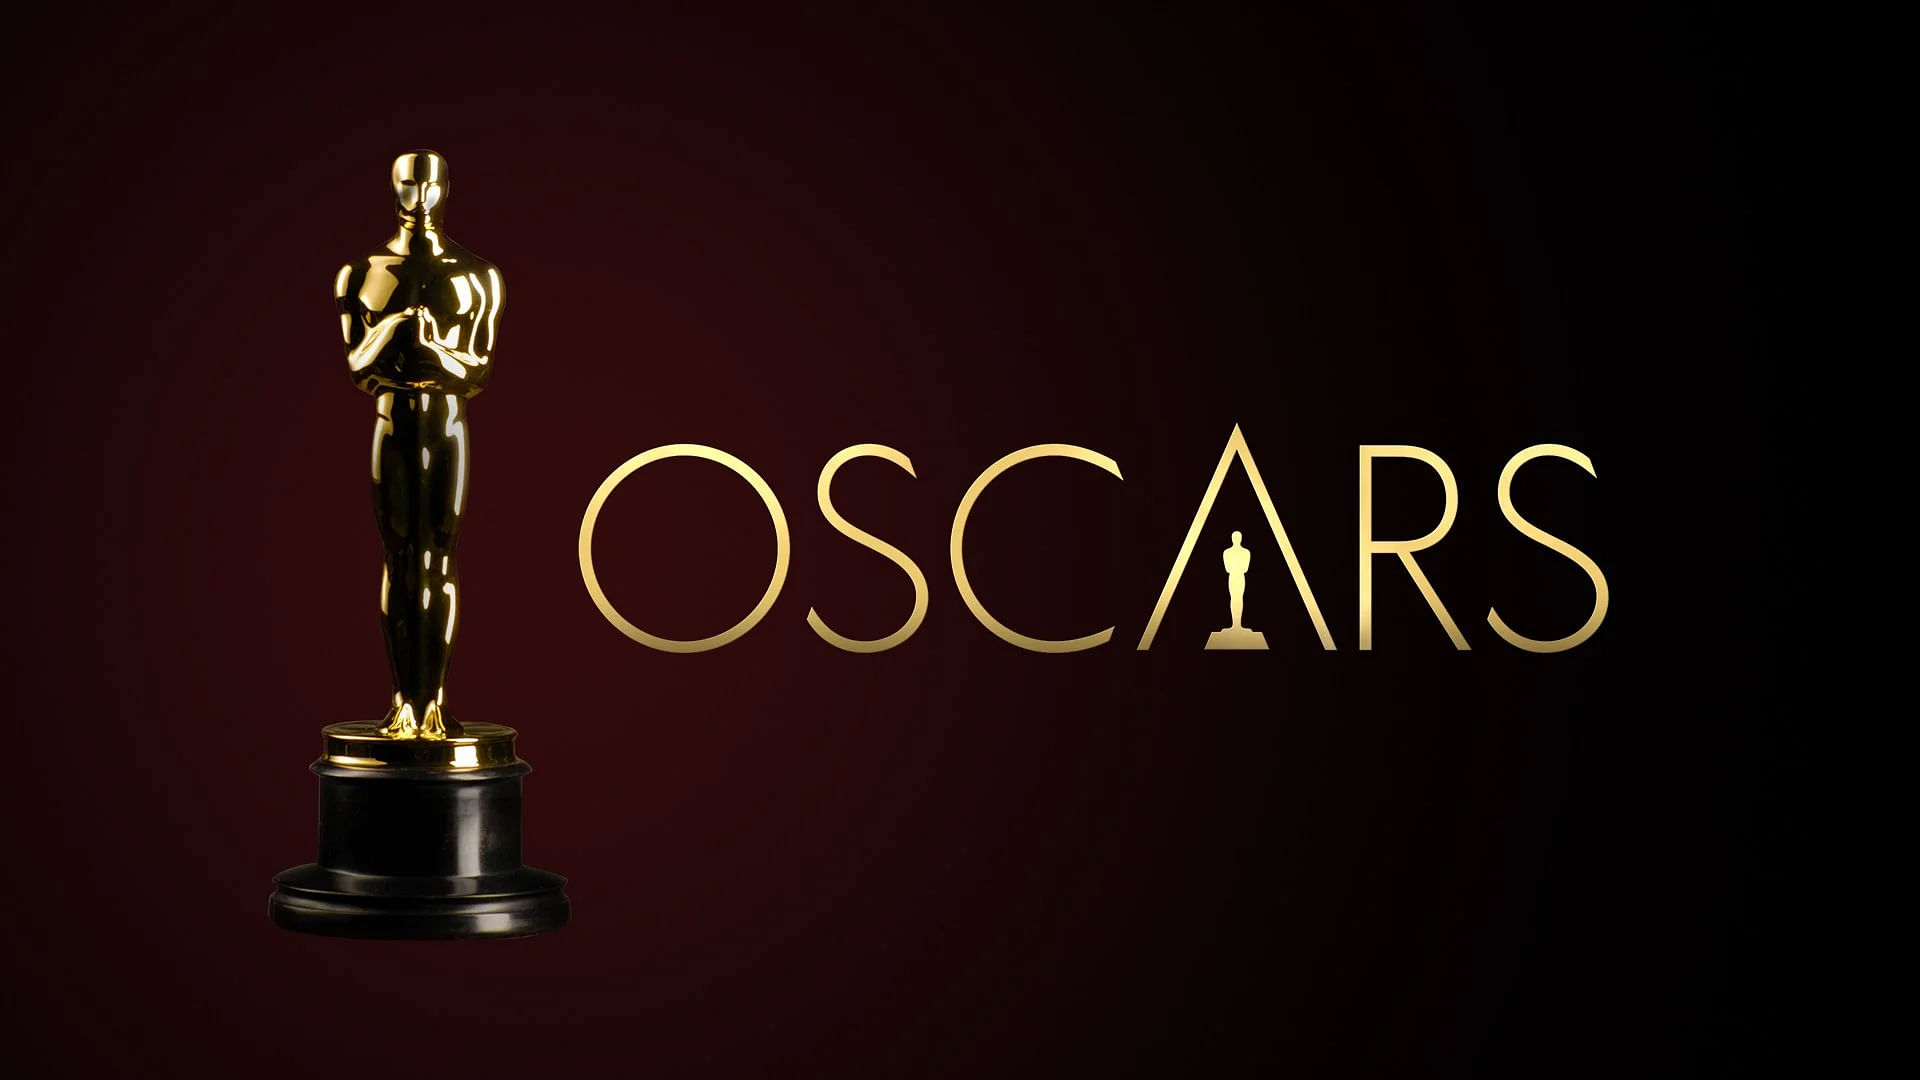 The Oscars 2020 will be telecast live in India on 10 February.